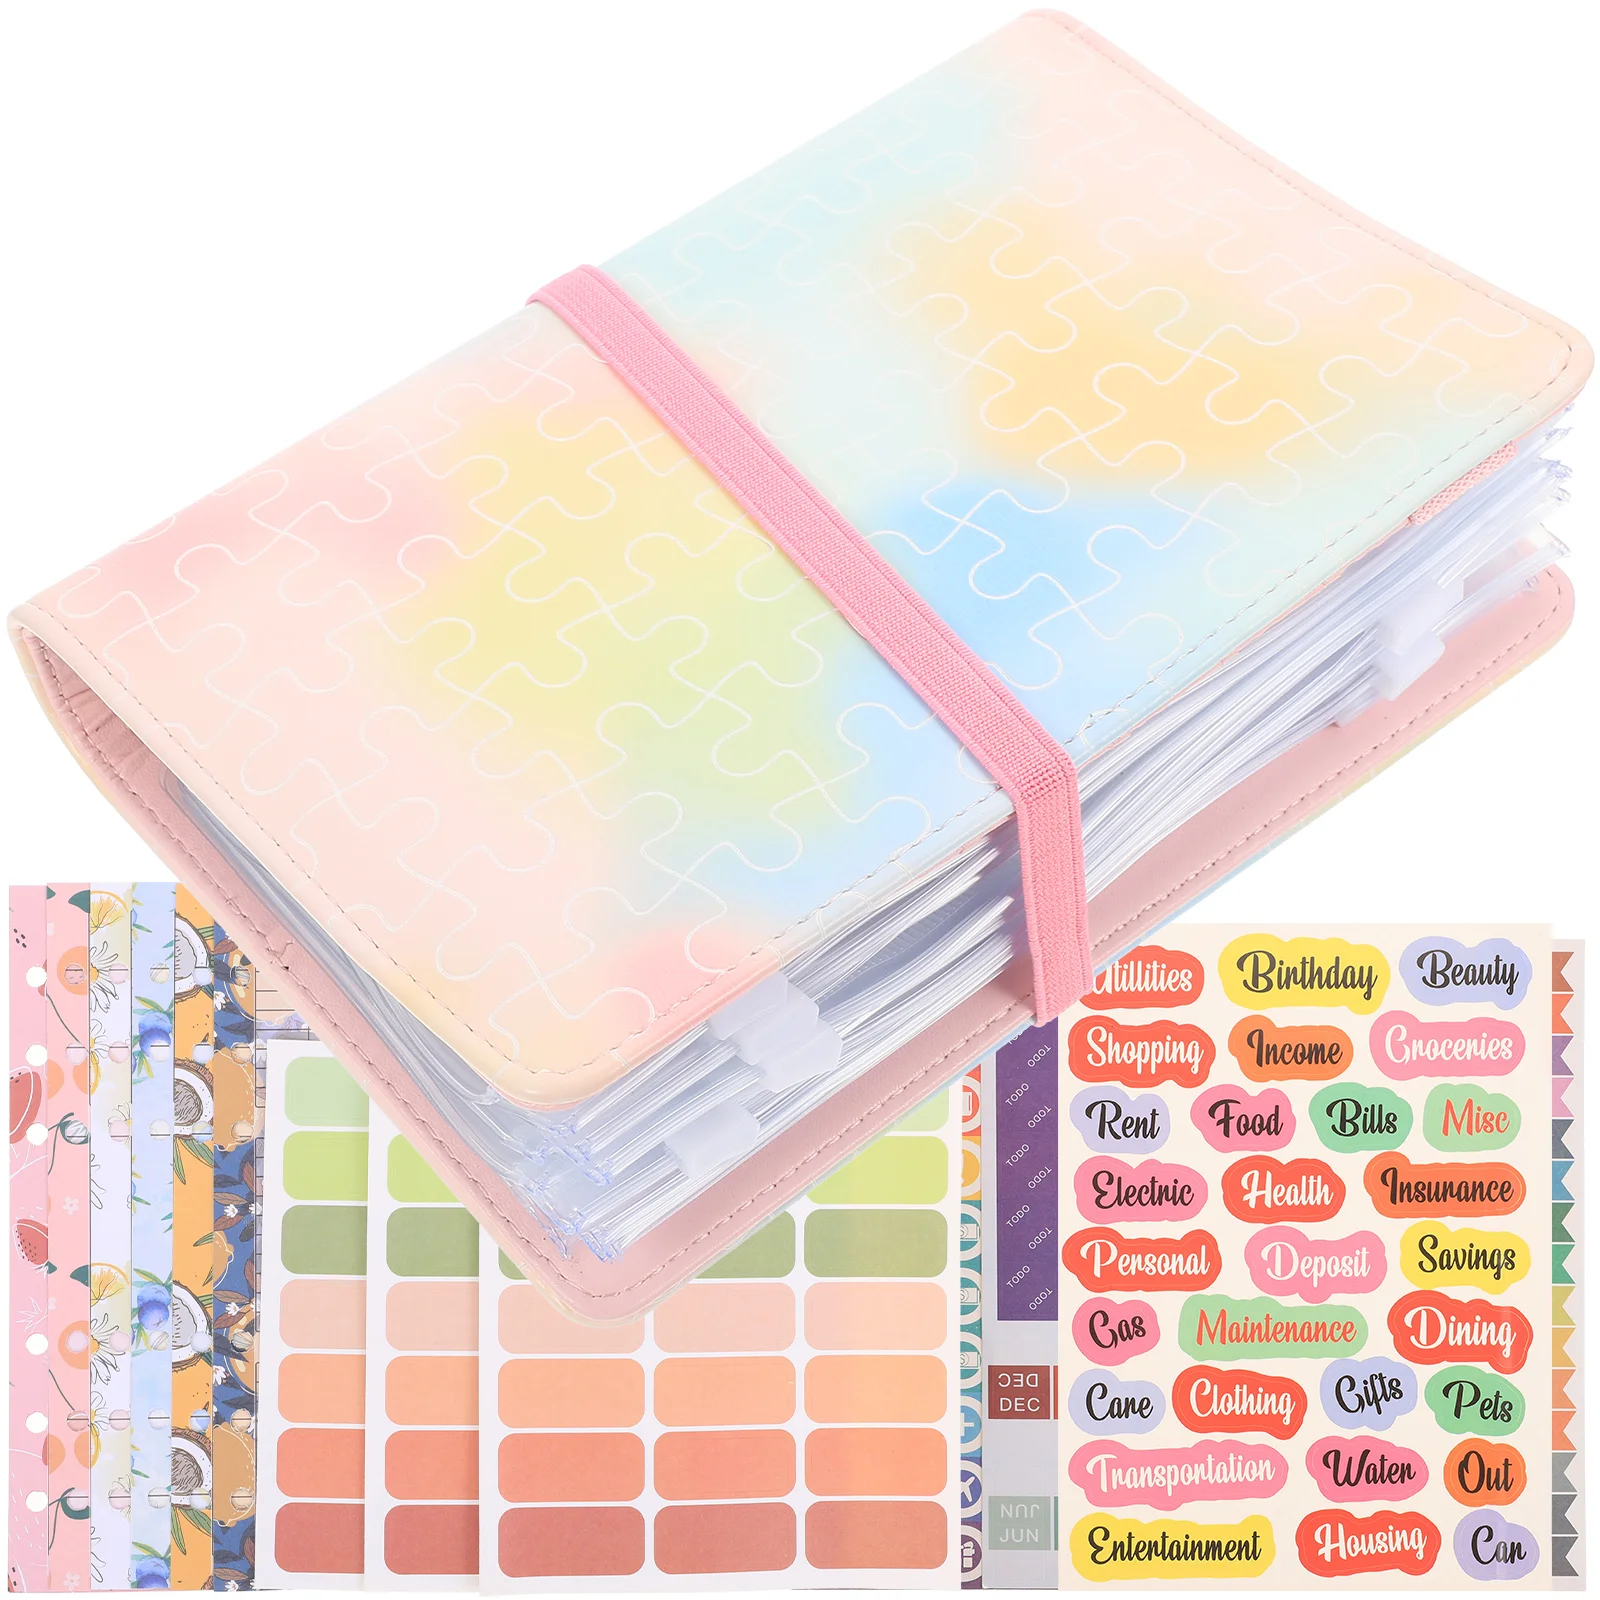 

Notebook Decorative Papers Money Recording Notepad Budget Business for Planning Pu Cash Expense Tracking Travel